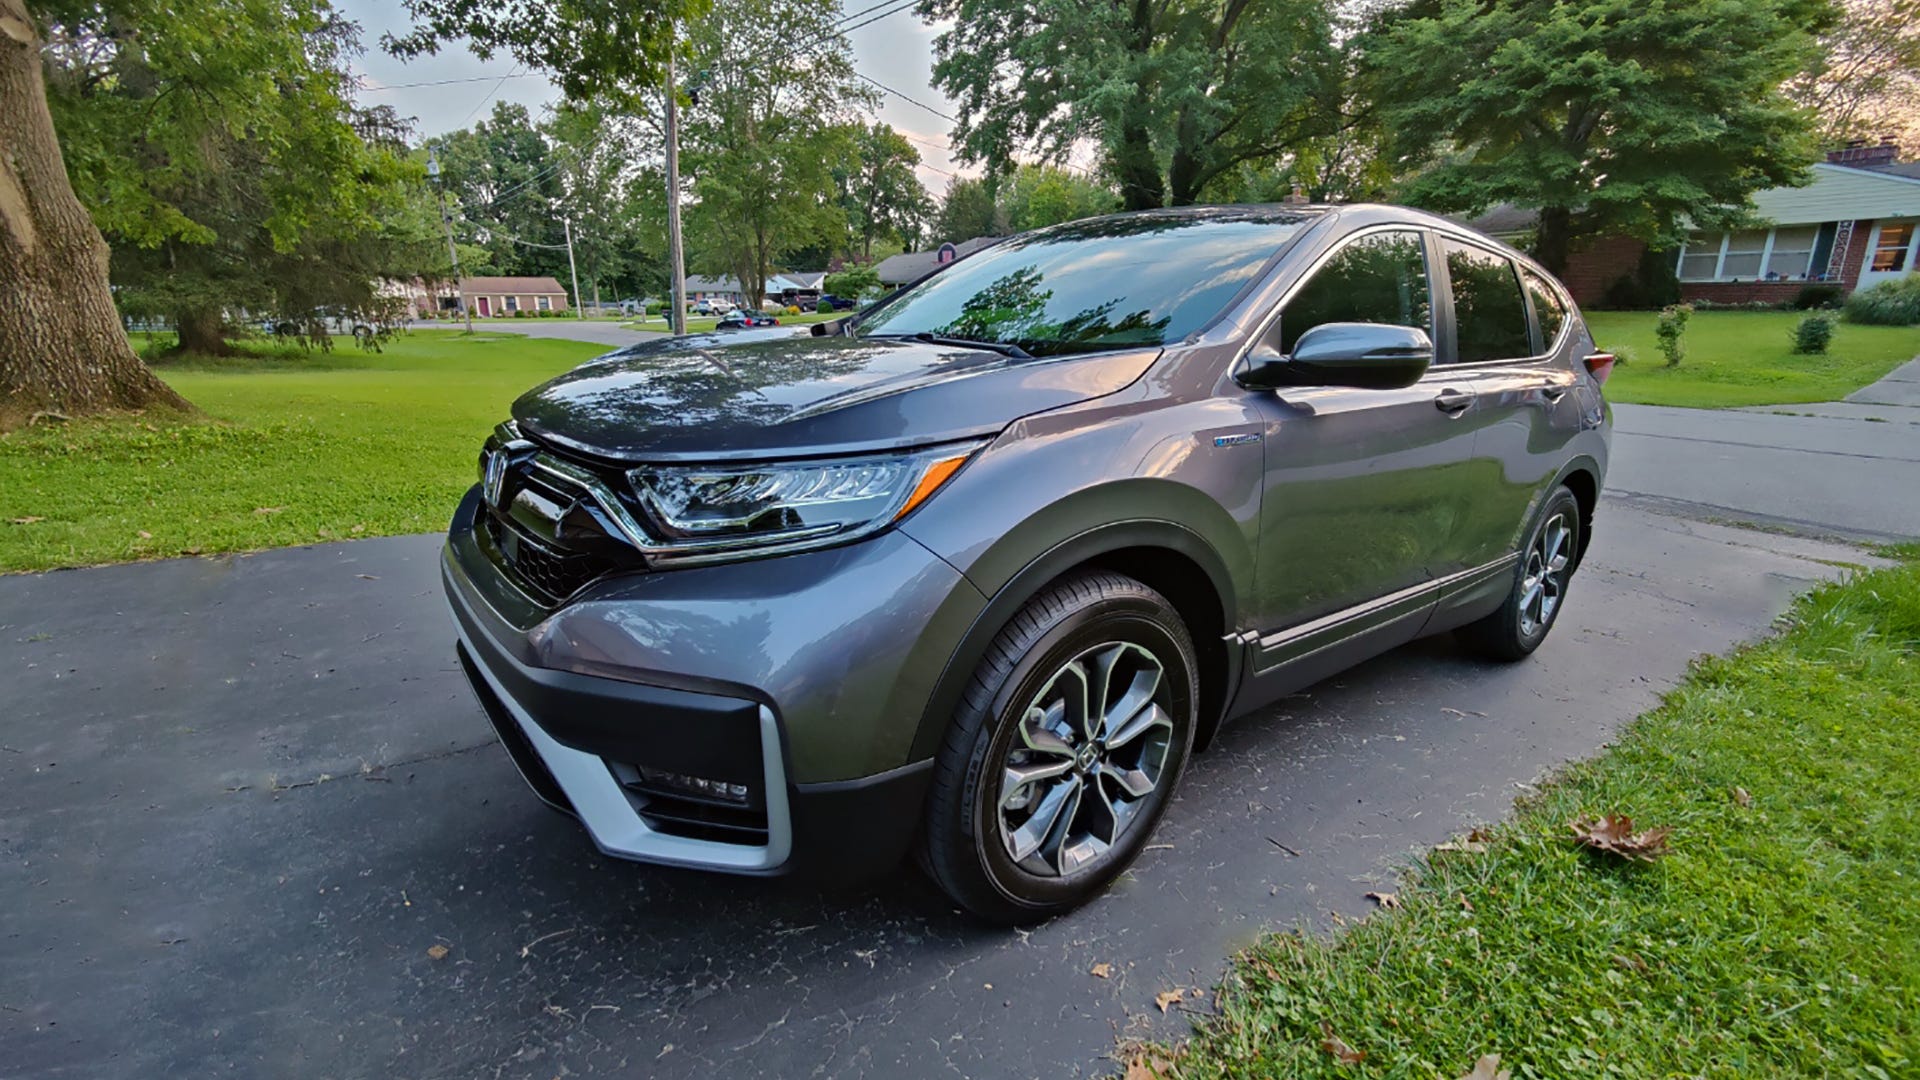 The same steel-grey Honda CR-V Hybrid from before, at another angle